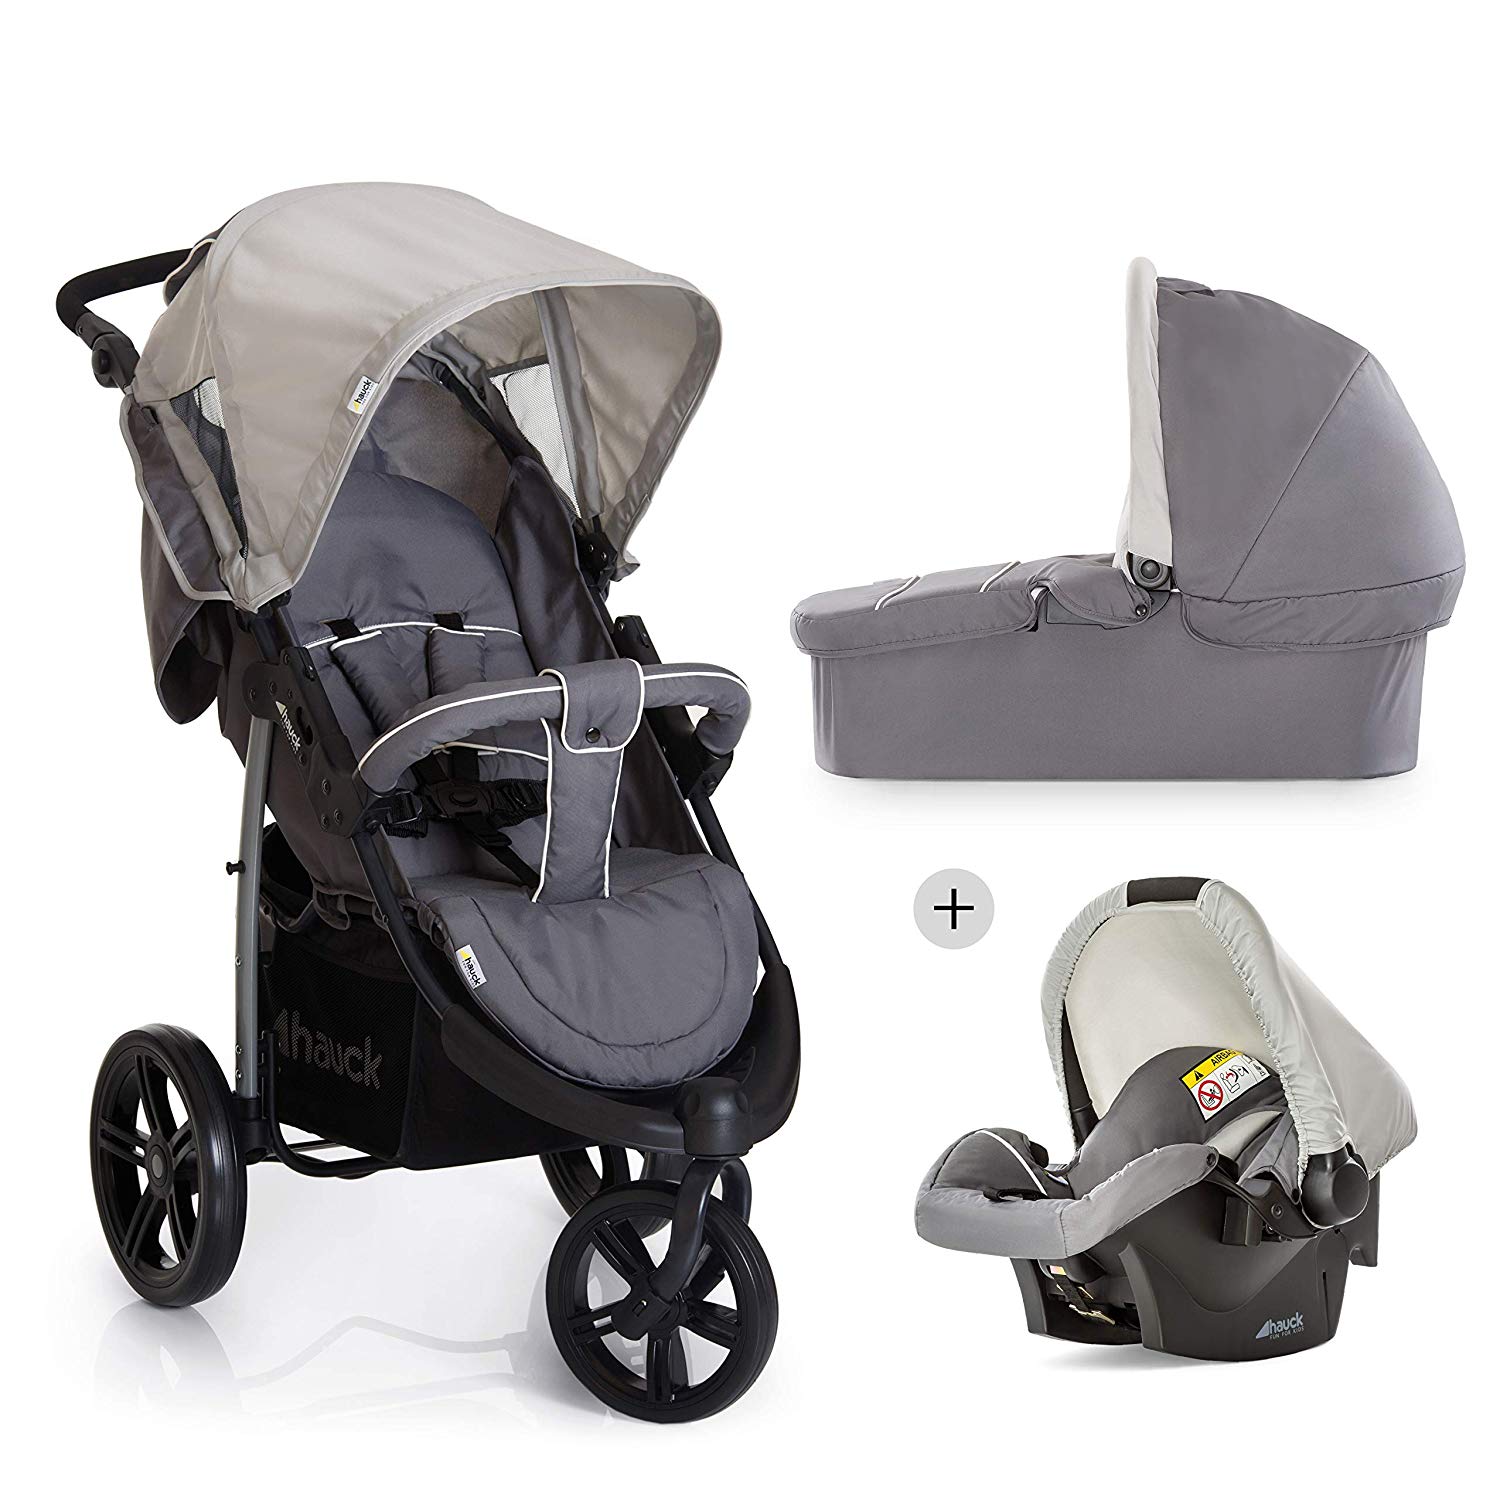 Hauck Viper SLX Trio set, from birth to 15 Kg travel system including car seat, baby seat and rain cover, 3 wheels, dark gray